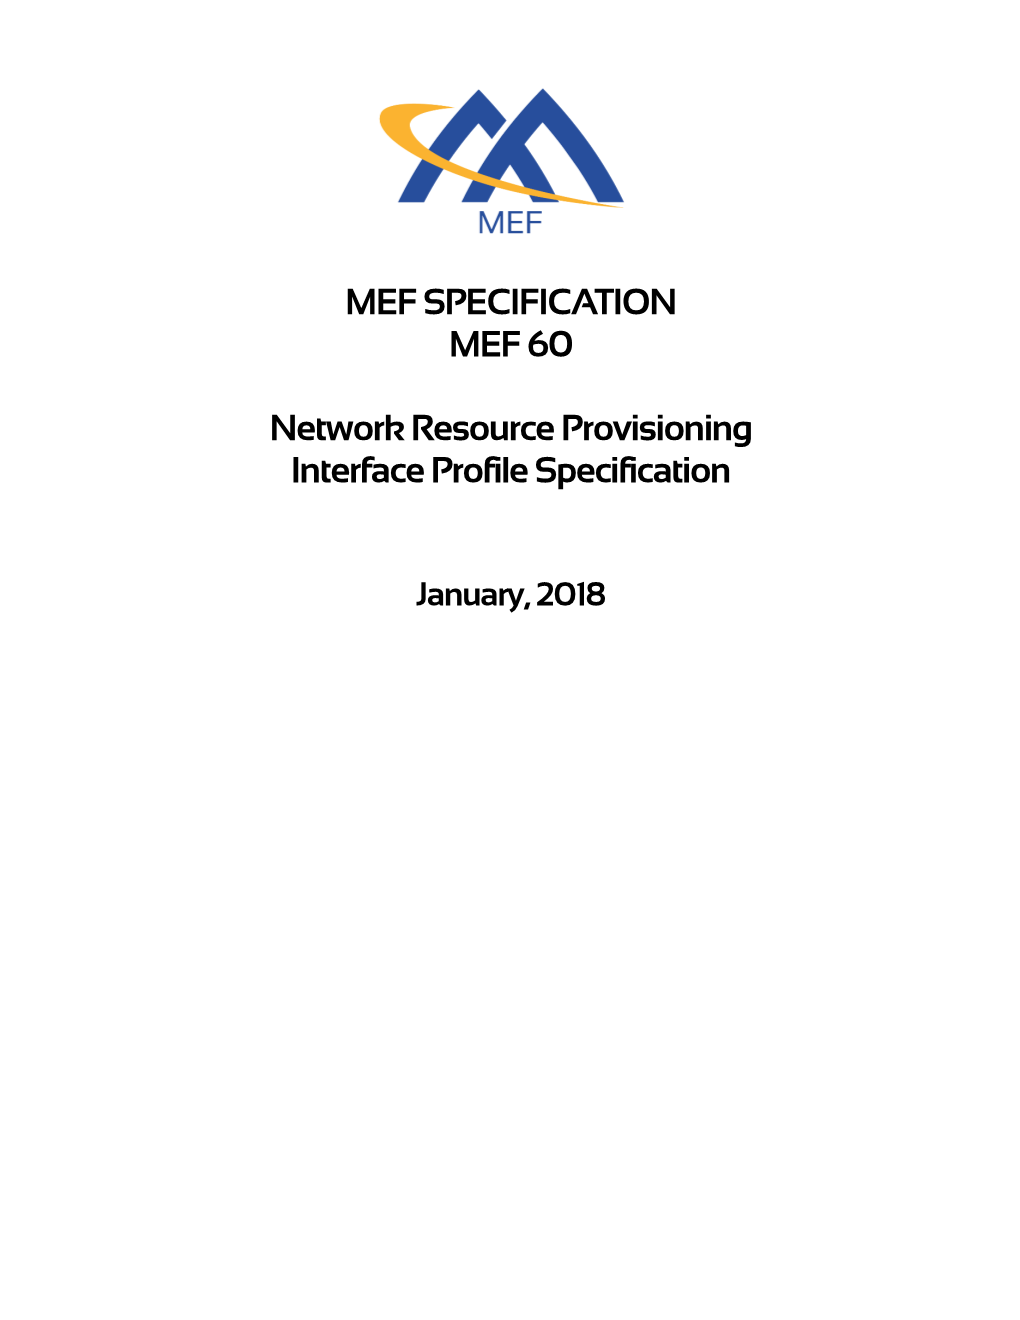 MEF 60: Network Resource Provisioning Interface Profile